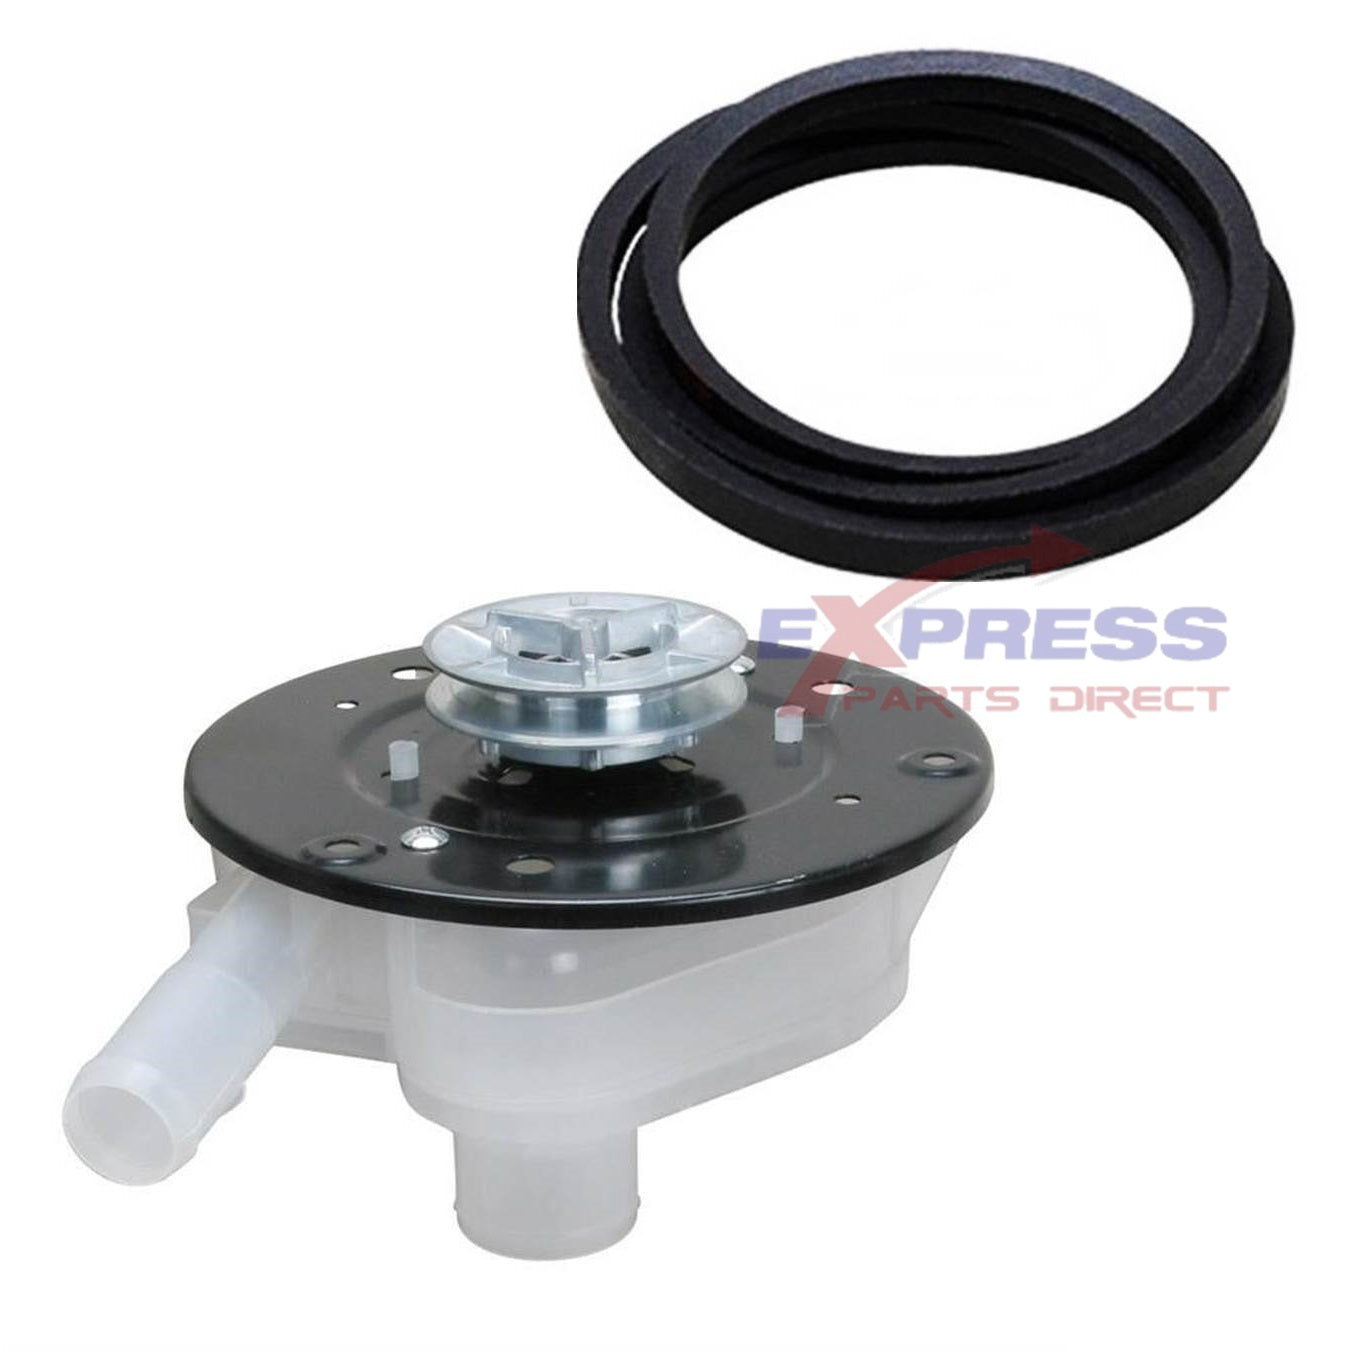 21002240 - 21352320 Washer Drain Pump and Belt Set Replaces WP35